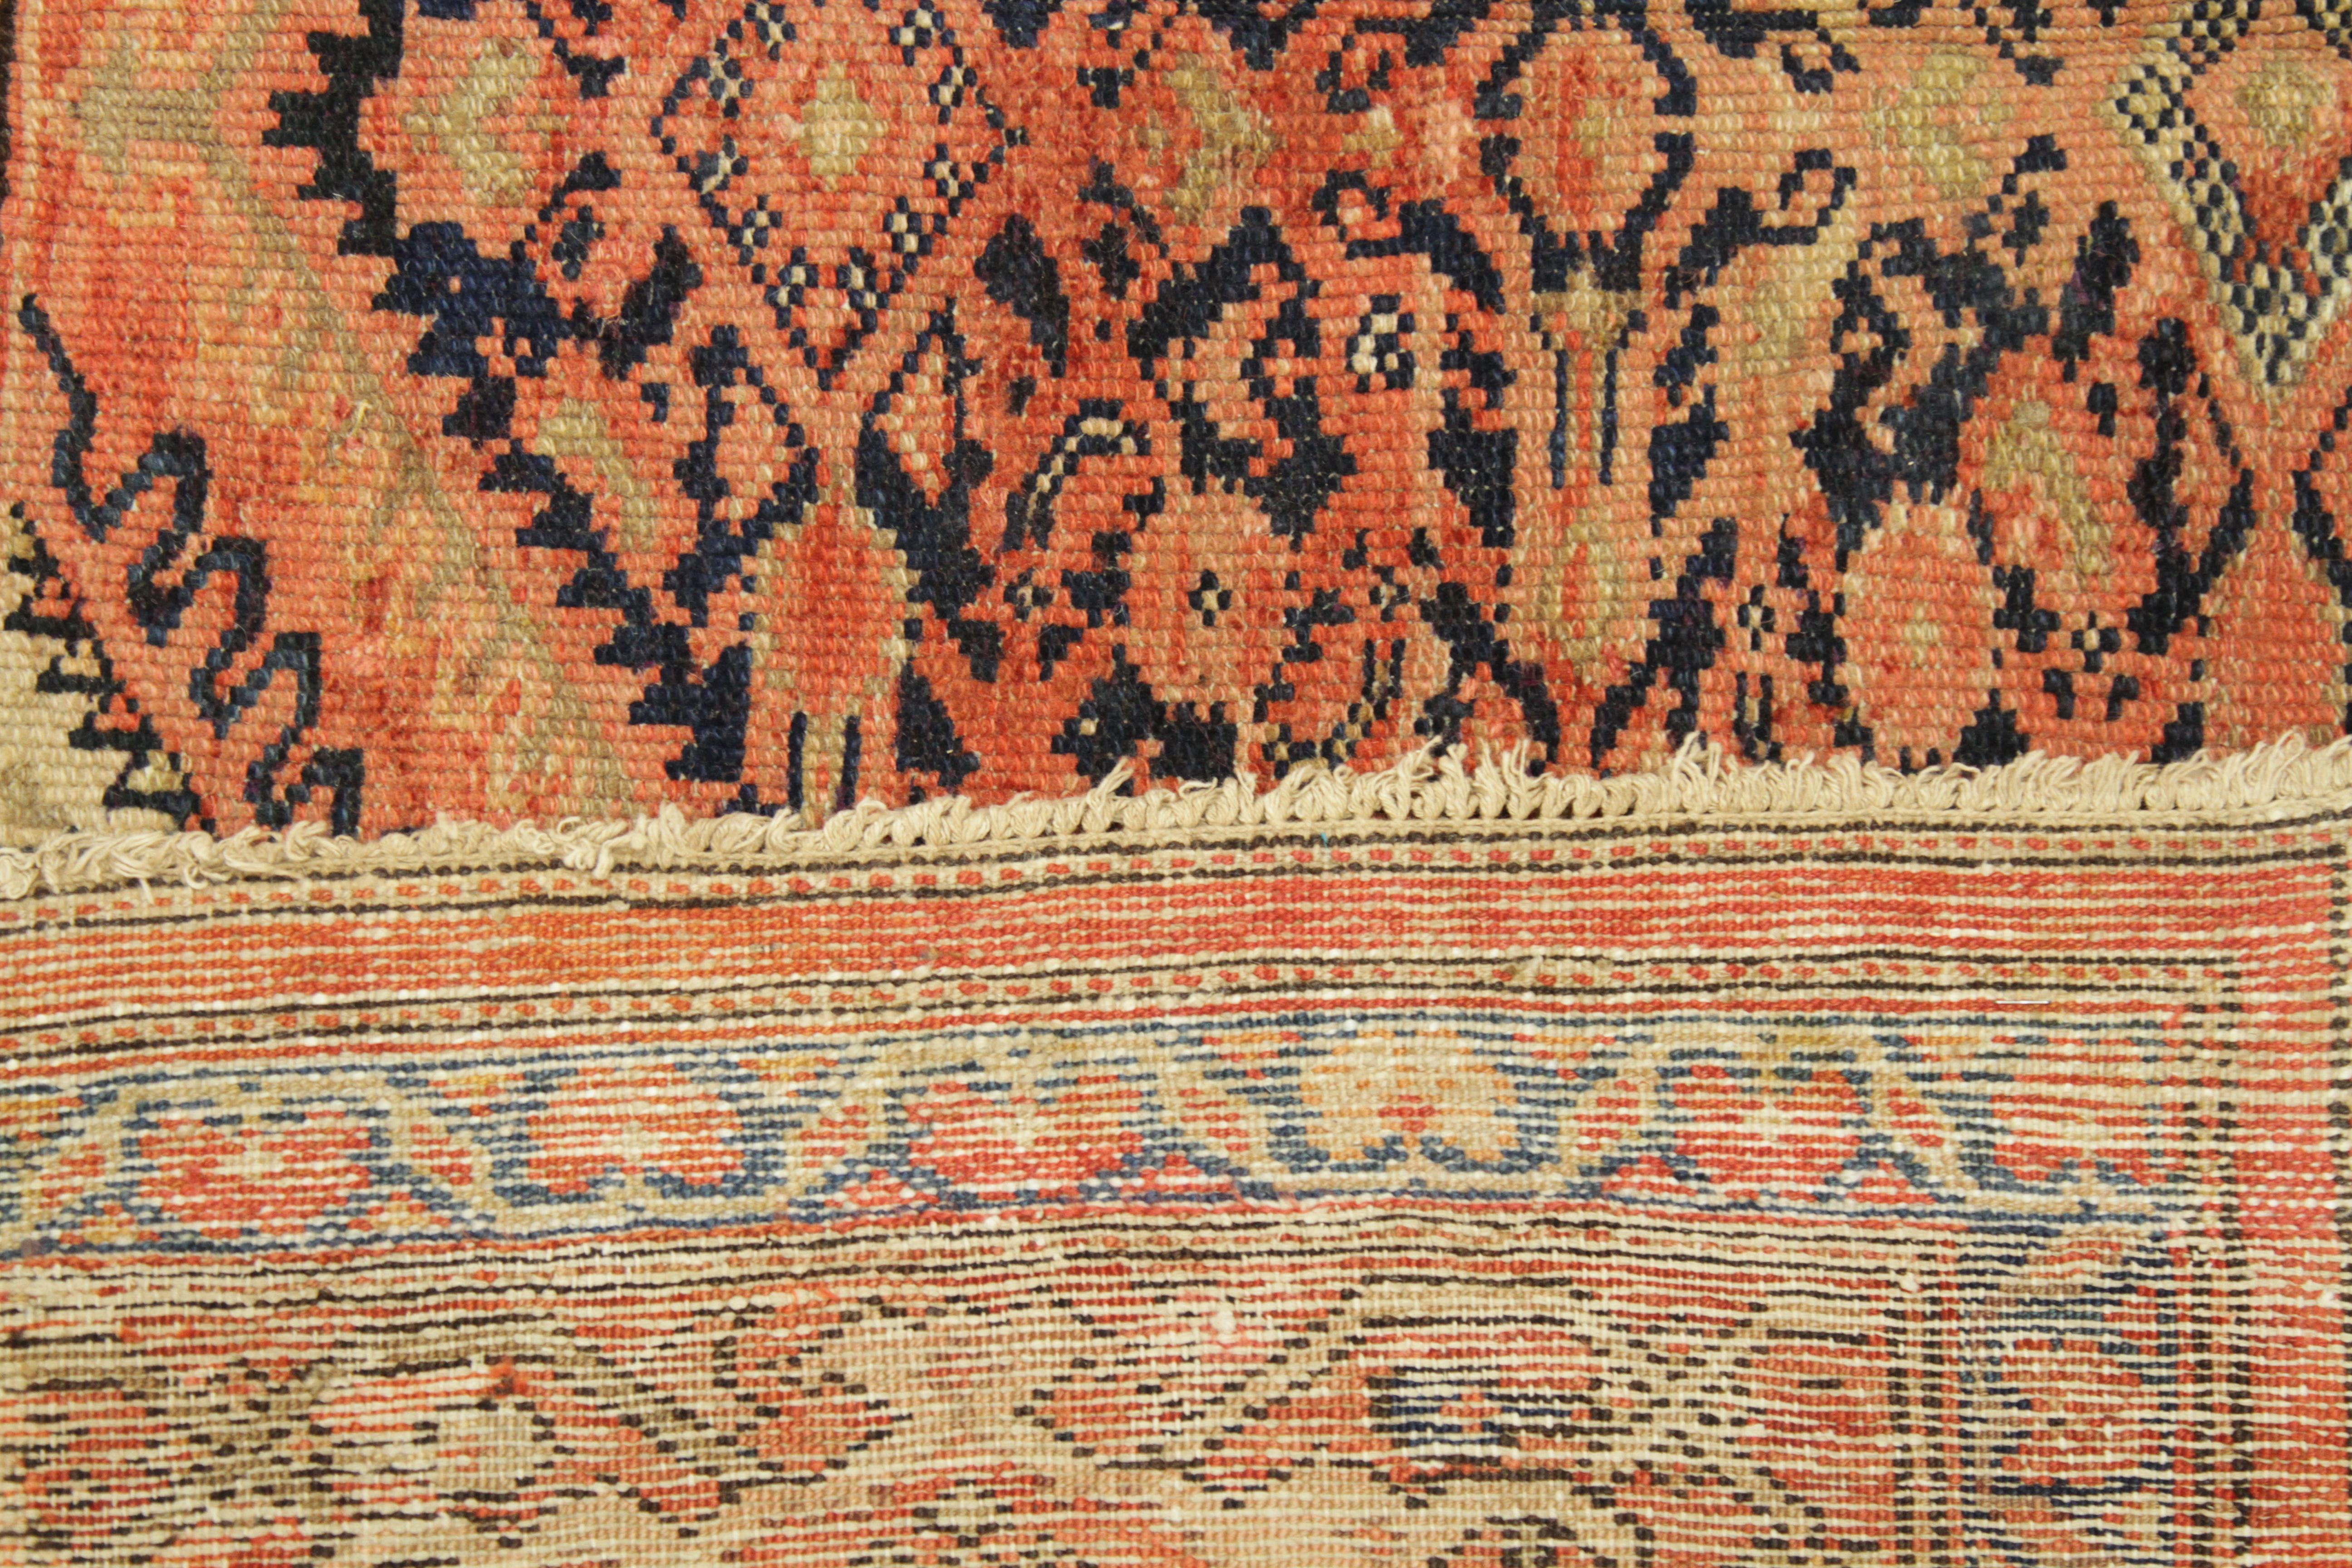 Wool Antique Persian Rug Malayer Design with Orange and Black Details, circa 1930s For Sale